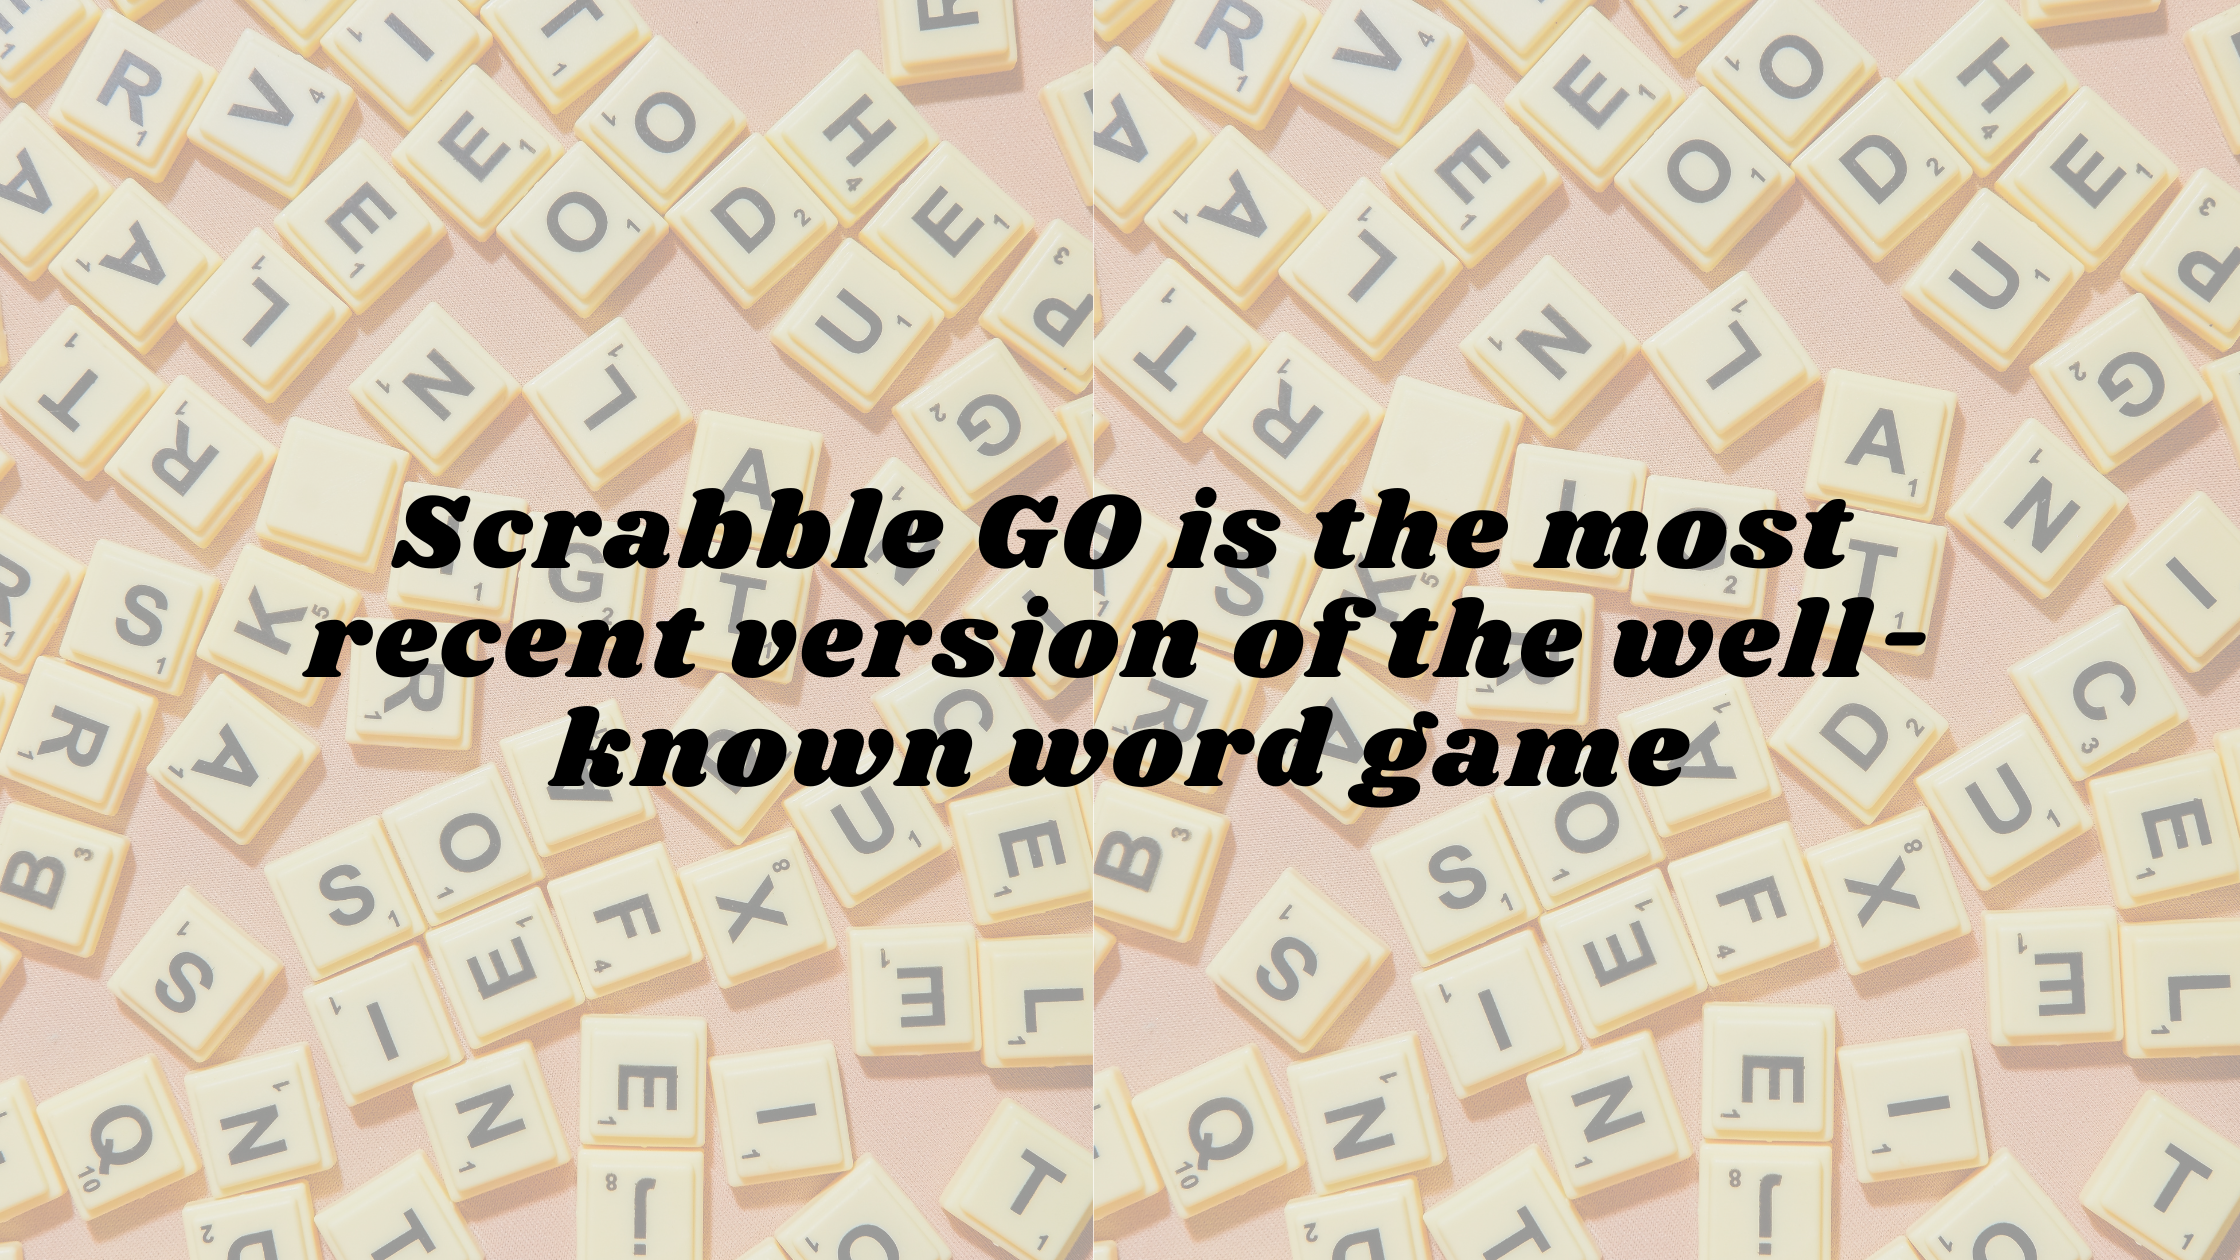 Scrabble GO is the most recent version of the well-known word game